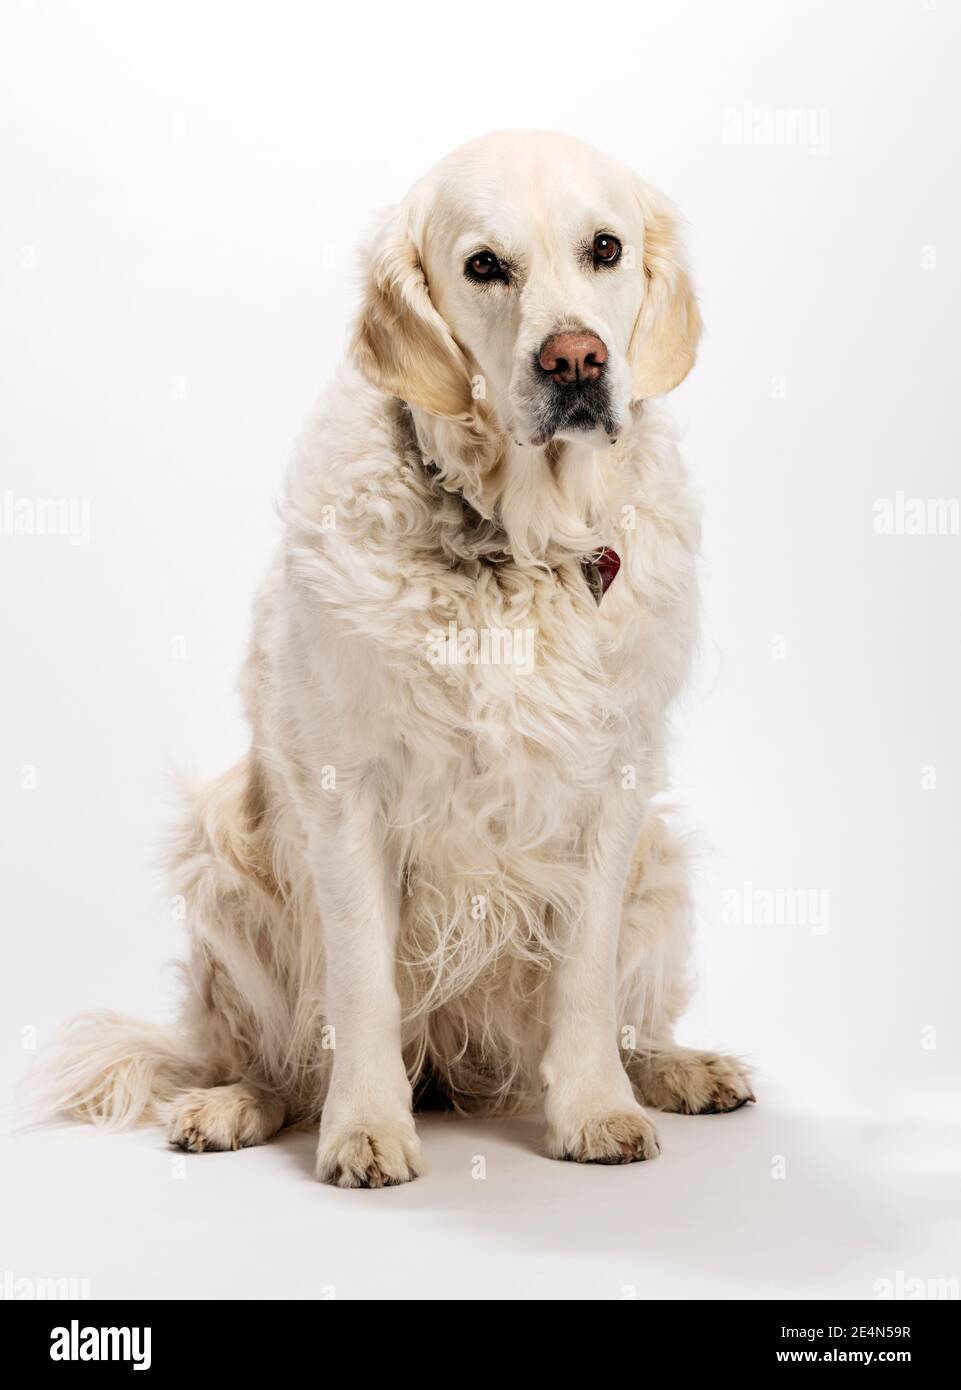 Eight year old Platinum, or Cream colored Golden Retriever dog on white photography studio background. Stock Photo